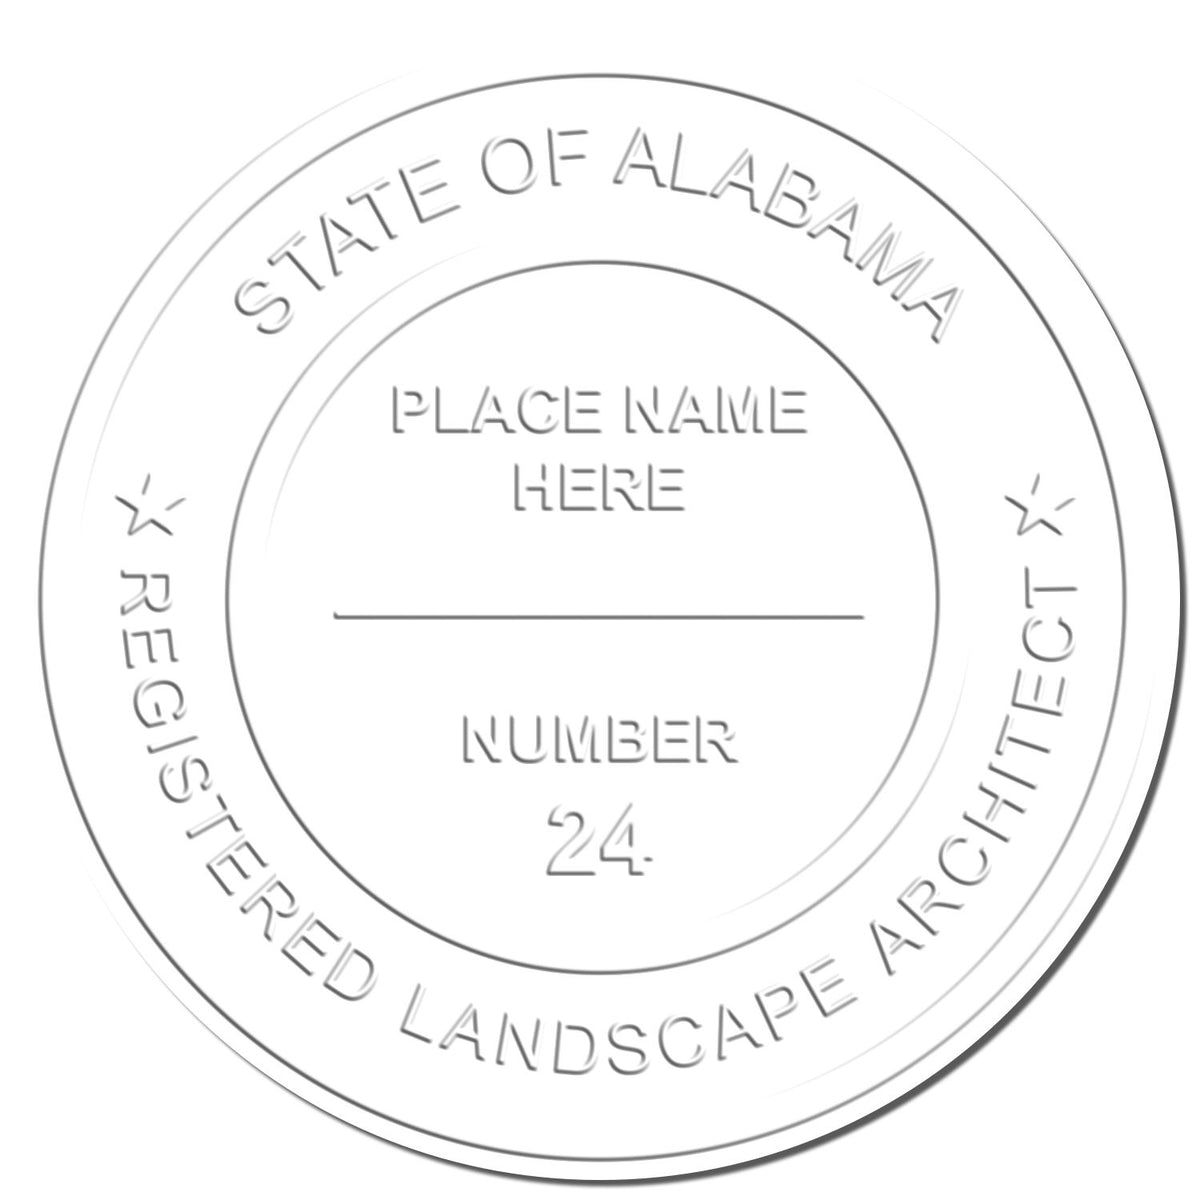 This paper is stamped with a sample imprint of the Soft Pocket Alabama Landscape Architect Embosser, signifying its quality and reliability.